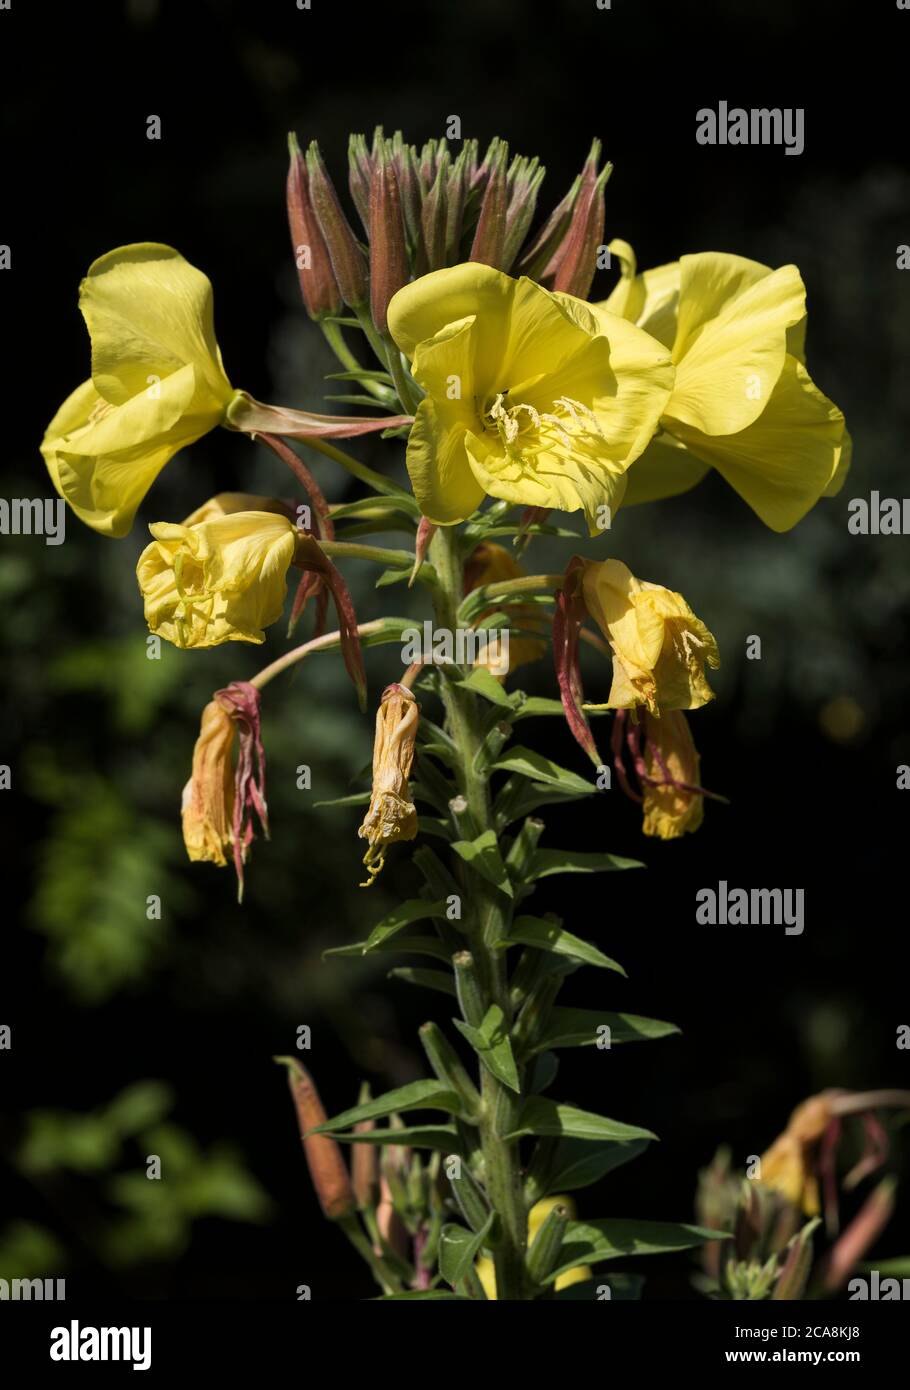 The flowers and buds of Evening Primrose - Oenothera biennis, aka Evening Star or Sundrop. Stock Photo